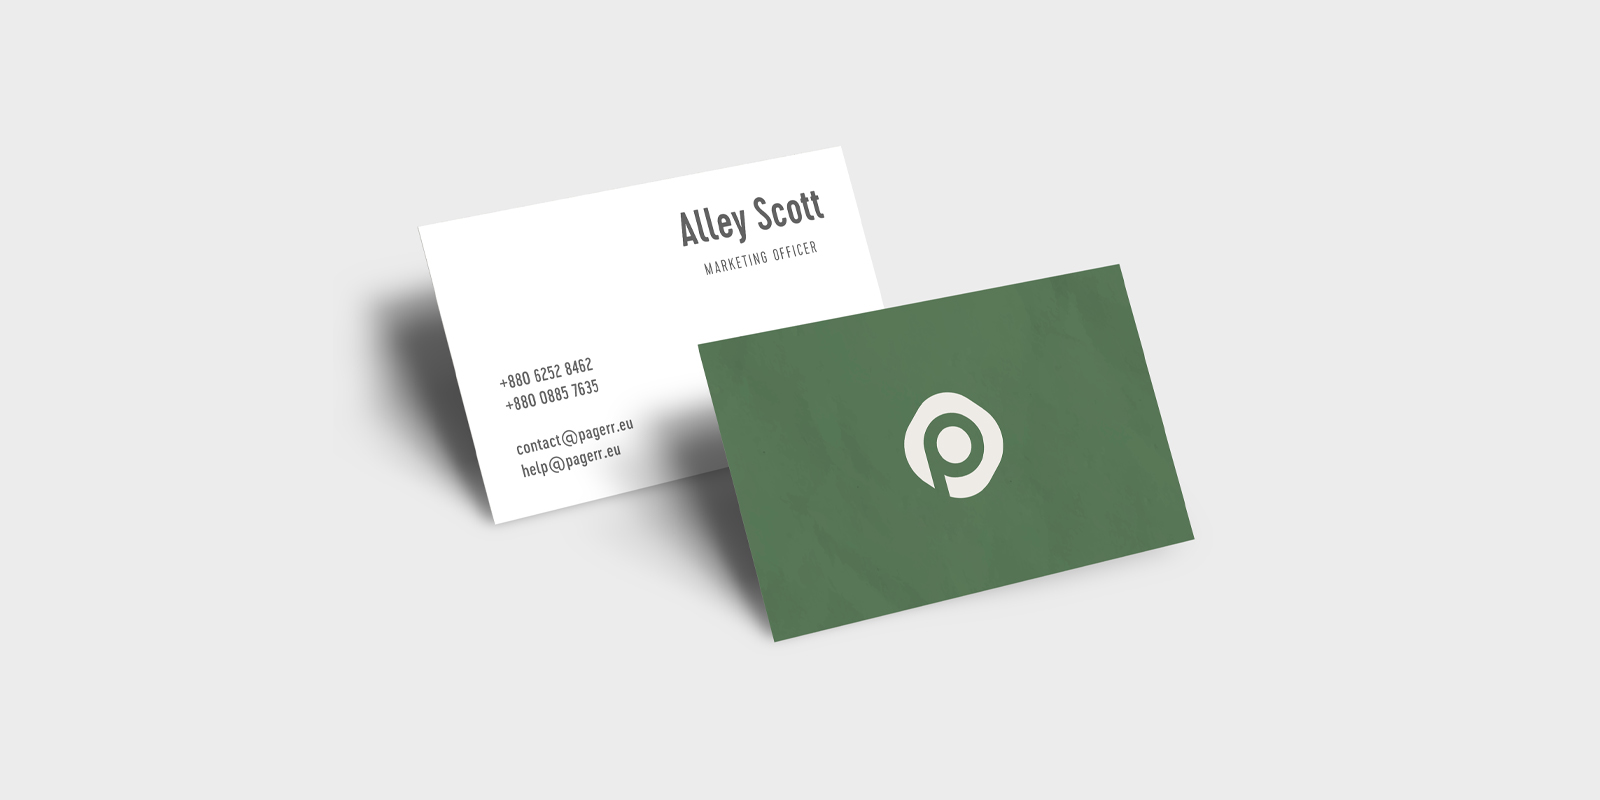 Simple business cards in Adelaide - Print with Pagerr